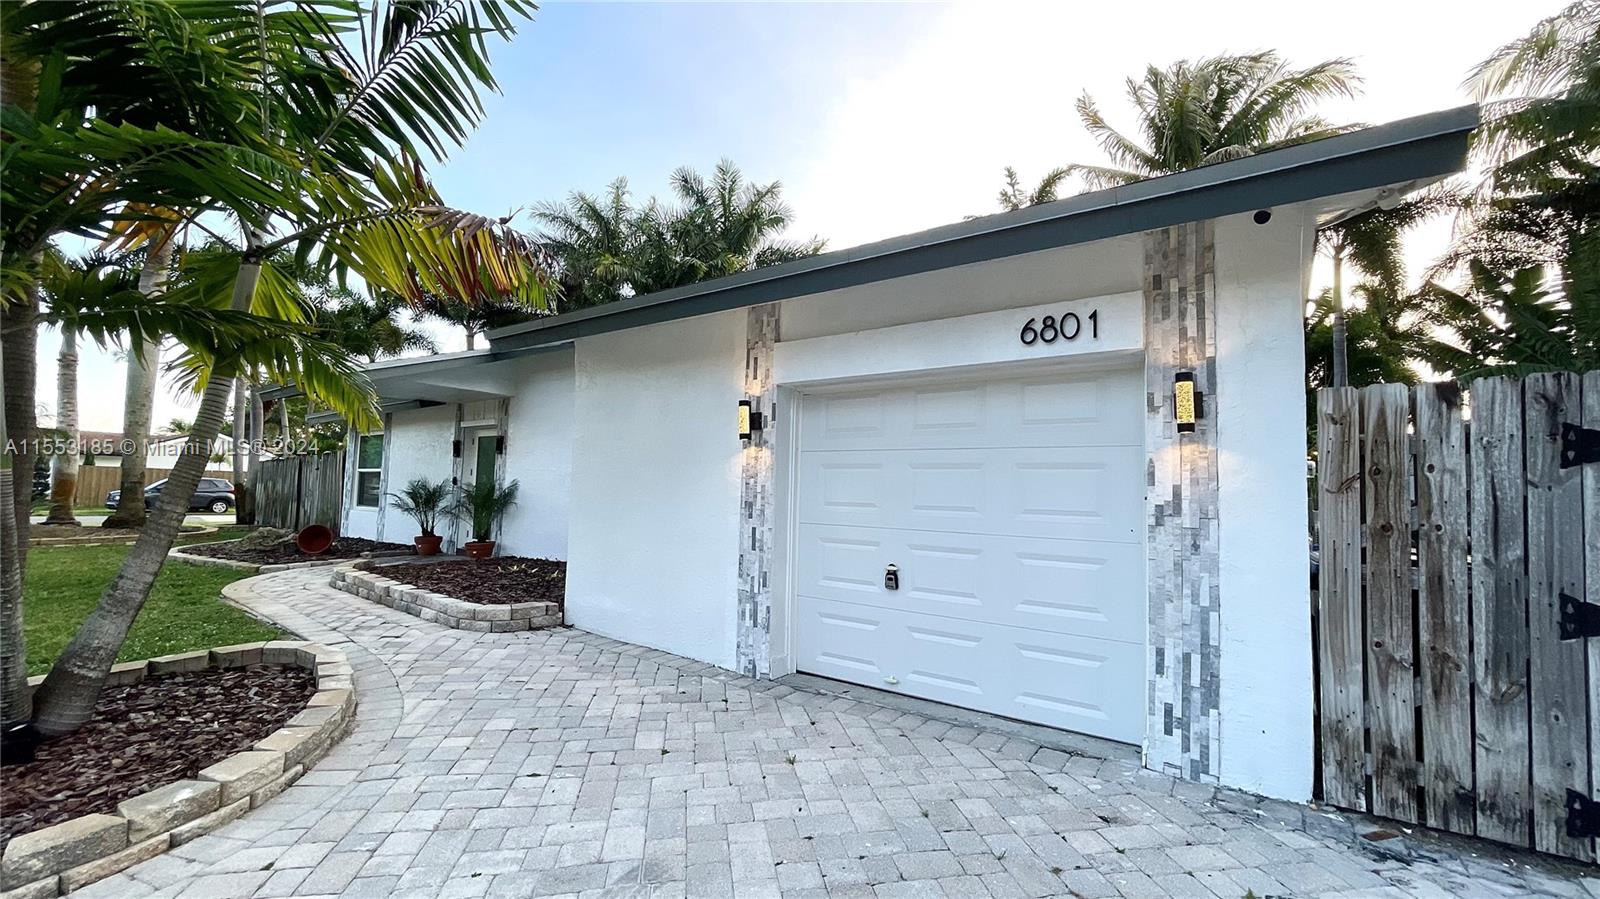 Photo 1 of Address Not Disclosed, Fort Lauderdale, Florida, $649,990, Web #: 11553185